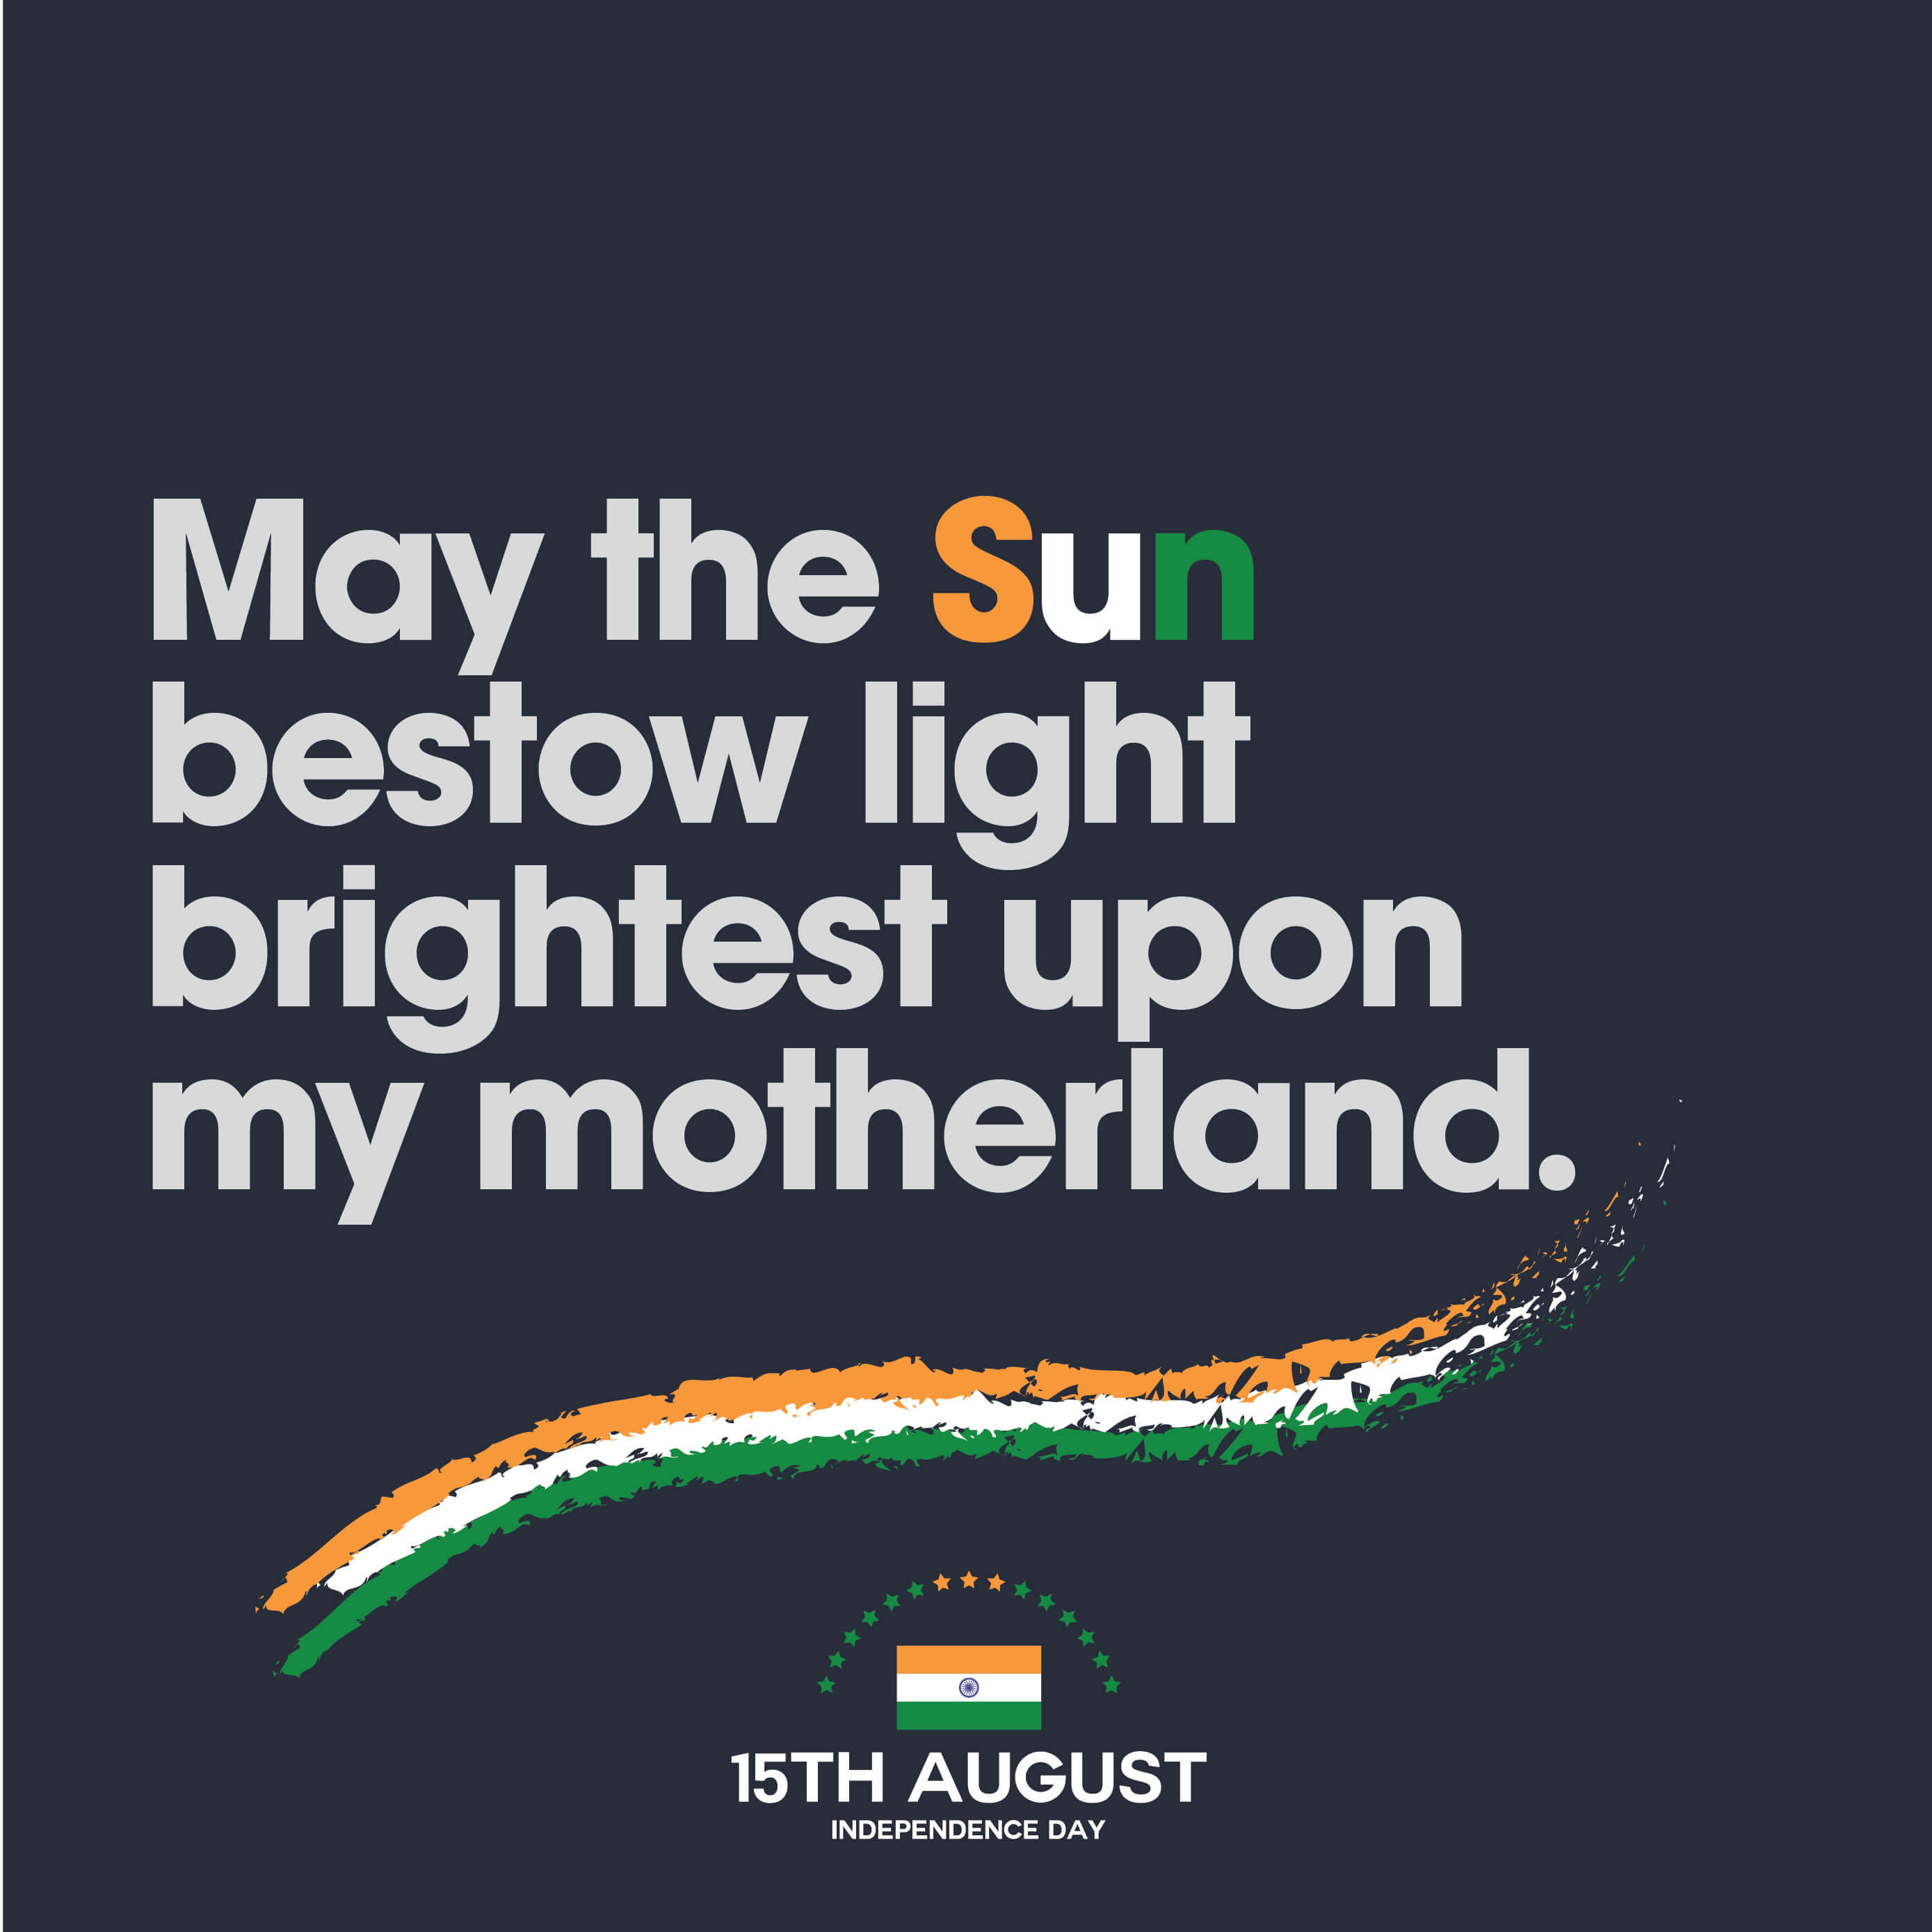 Best Independence Day Wishes Messages and Quotes